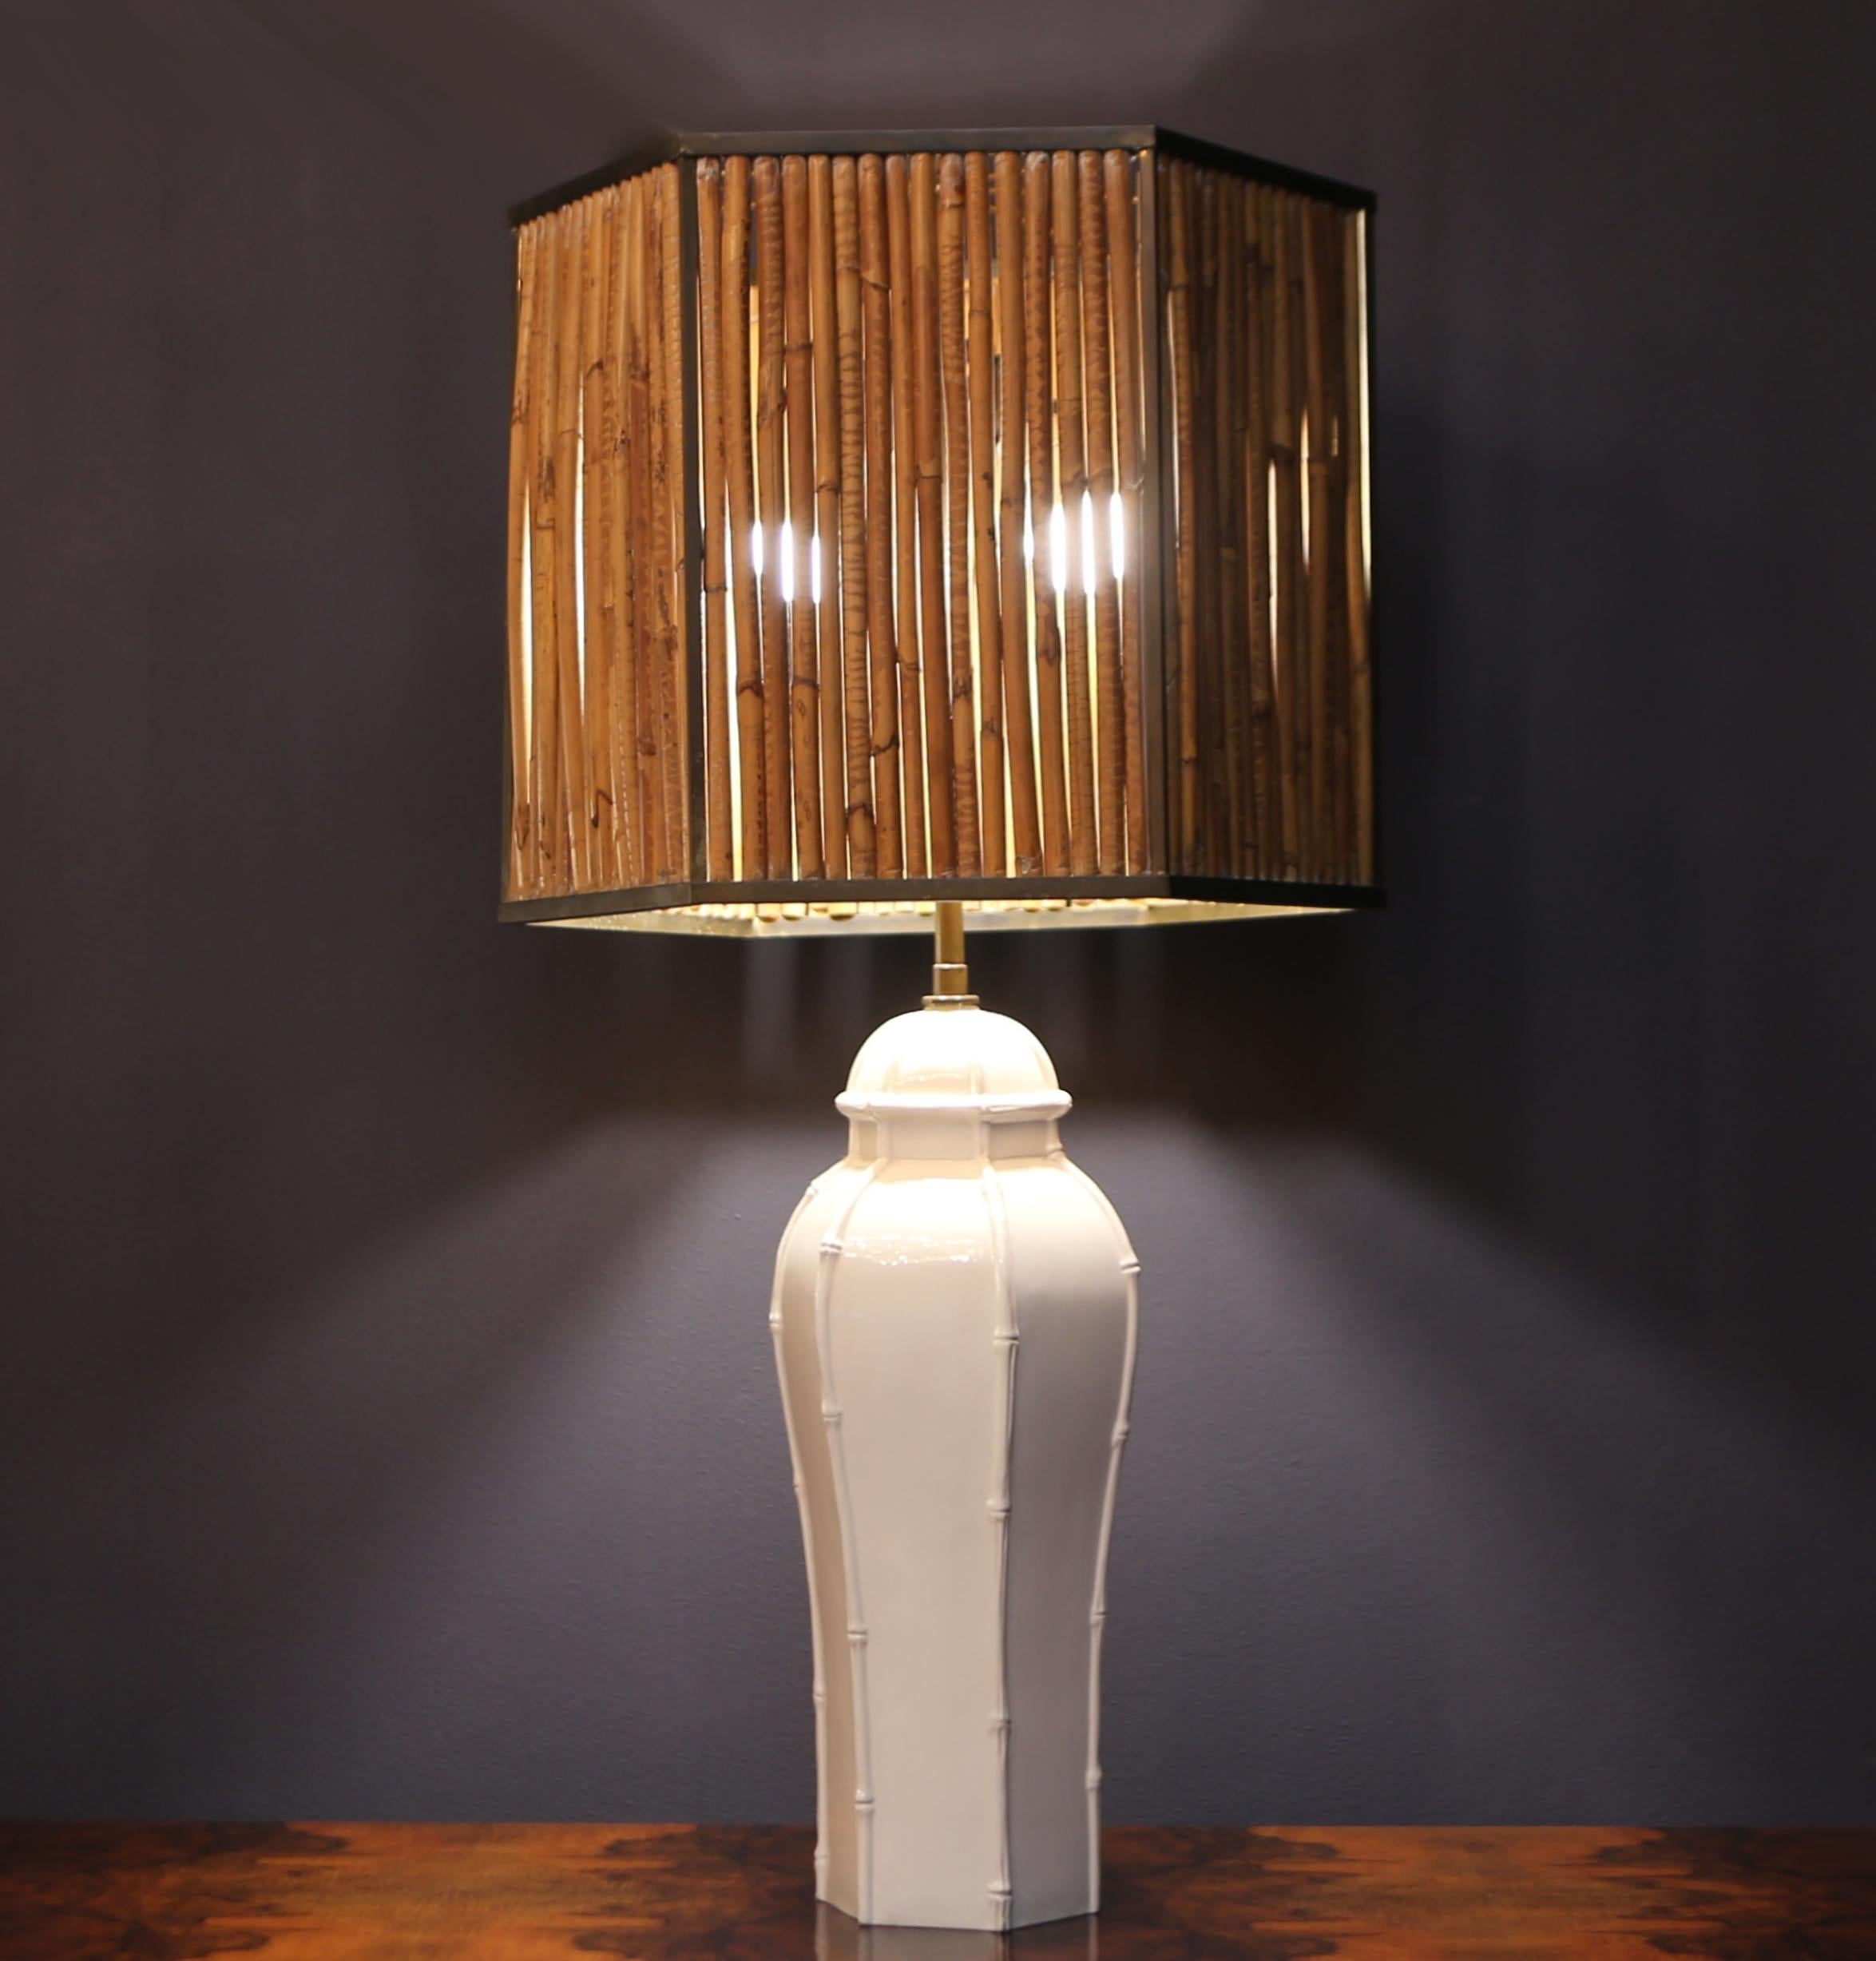 Rare big Table Lamp in ceramic  Bamboo and Brass, Italy, 1970s.
This lamp is an example of Italian design ideal for modern spaces.
the base of this lamp is in ceramic with a reference to bamboo. the lampshade is made of brass with bamboo slats. all